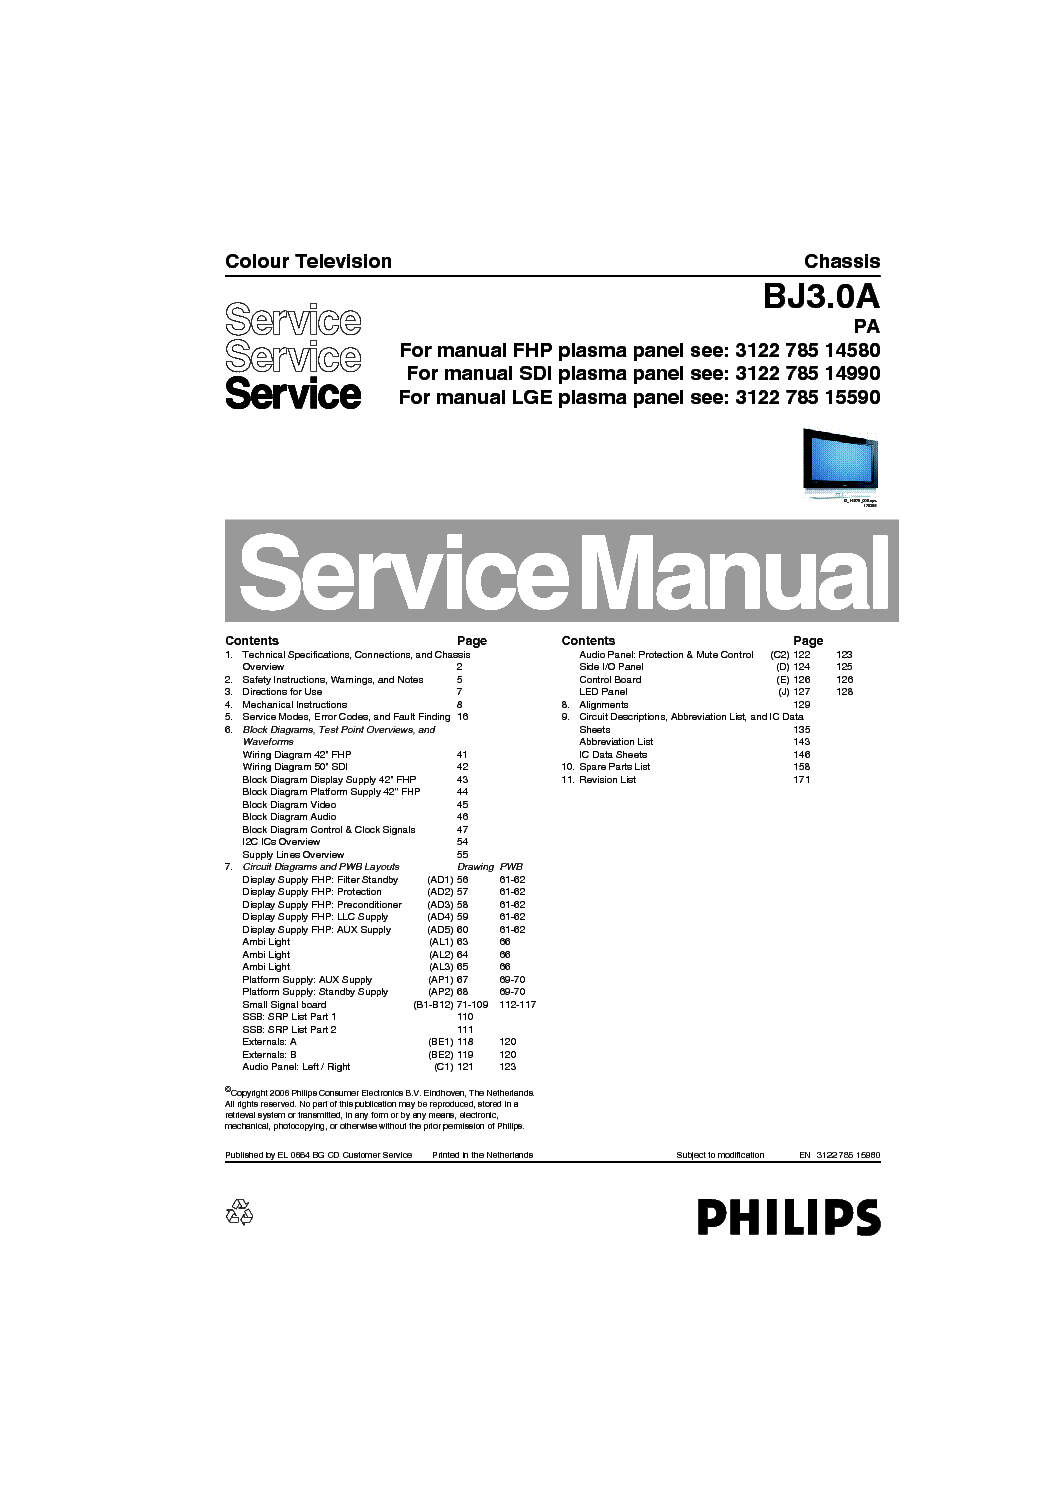 PHILIPS CHASSIS BJ3.0A-PA service manual (1st page)